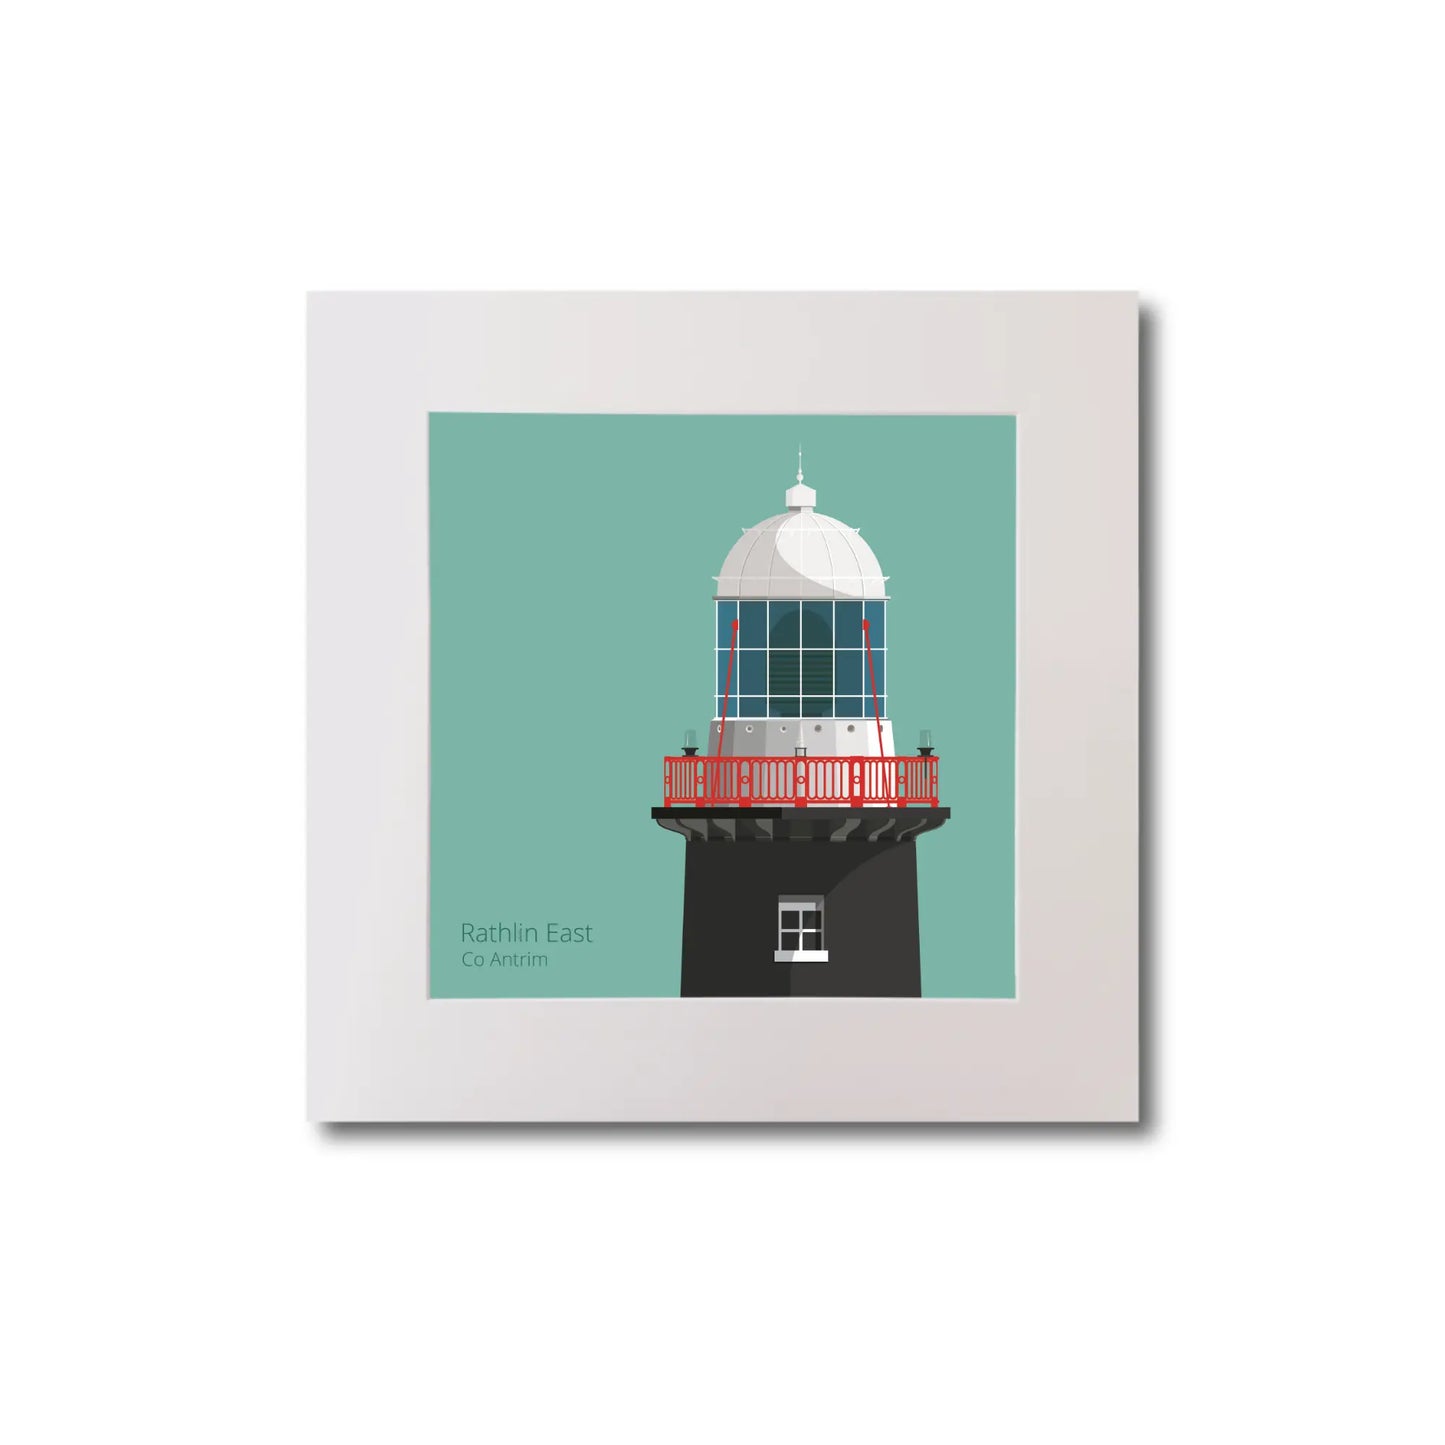 Illustration of Rathlin East lighthouse on an ocean green background, mounted and measuring 20x20cm.